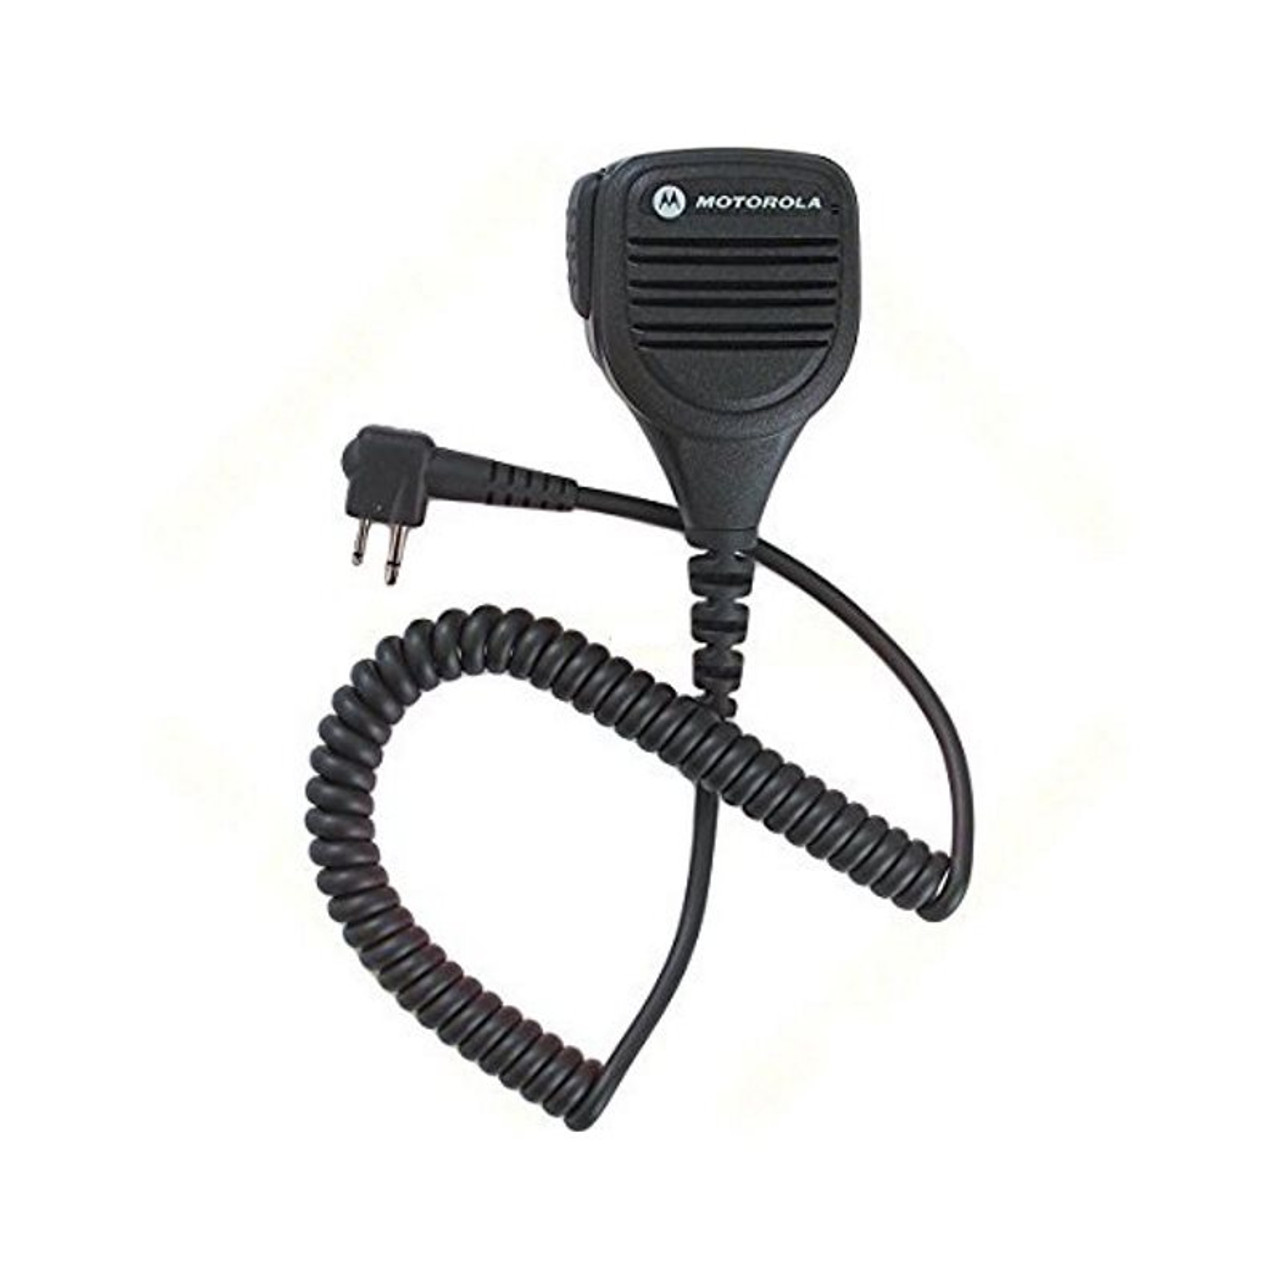 Motorola PMM4103 Heavy Duty Remote Speaker Microphone for CP200 Business  Radios has a 2-Pin set up and is great for security or construction jobs.